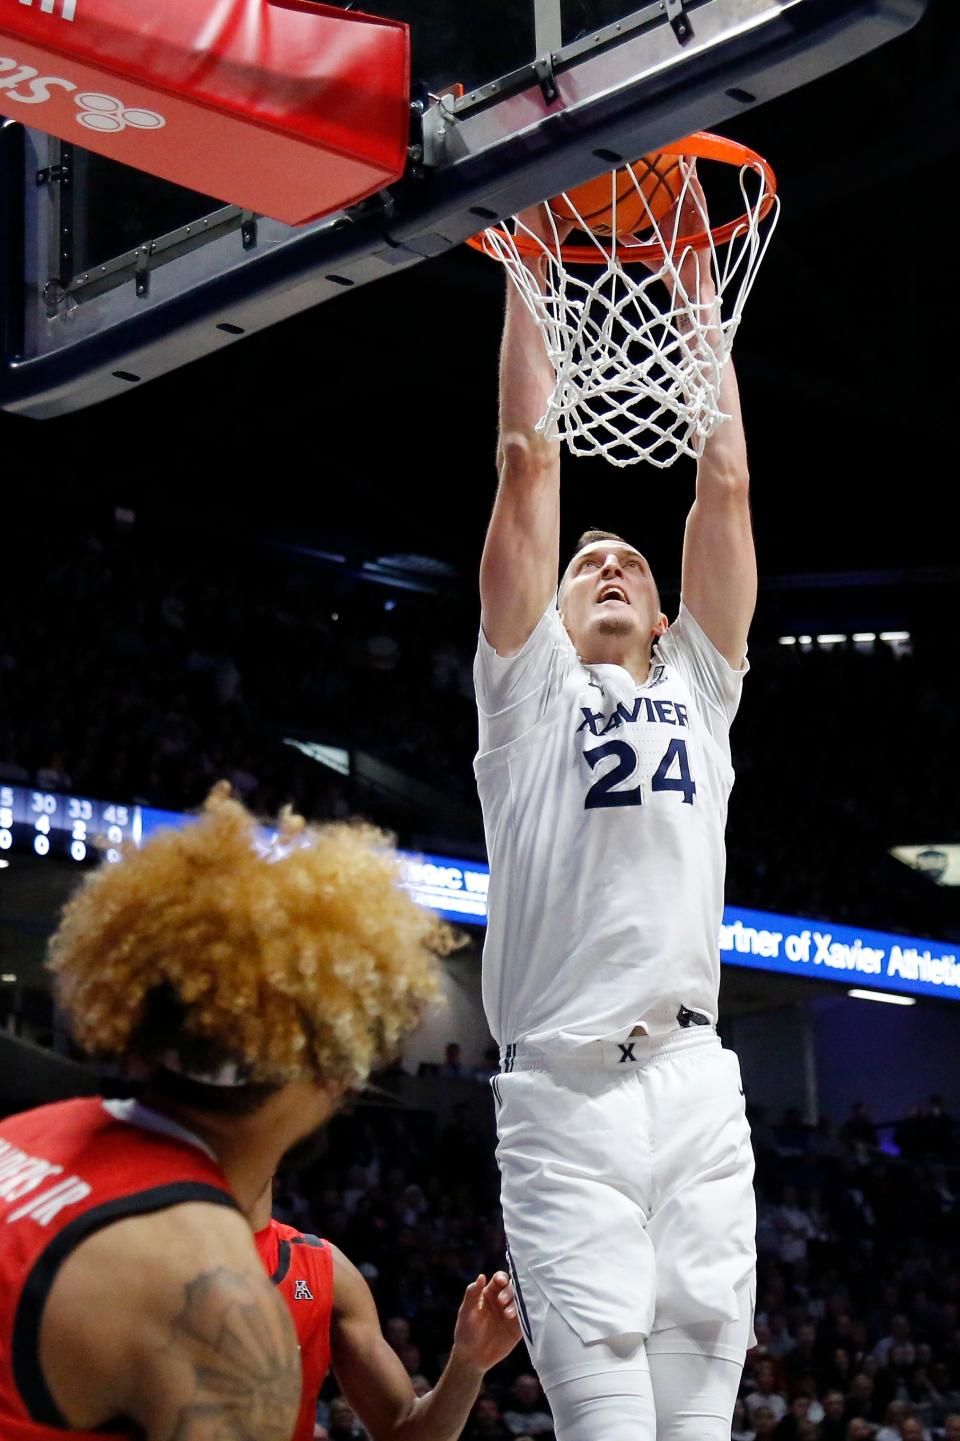 Xavier Musketeers forward Jack Nunge (24) dunks in the first half of the 89th Annual Crosstown Shootout basketball game between the Xavier Musketeers and the Cincinnati Bearcats at the Cintas Center in Cincinnati on Saturday, Dec. 11, 2021. Xavier led 42-27 at halftime. 